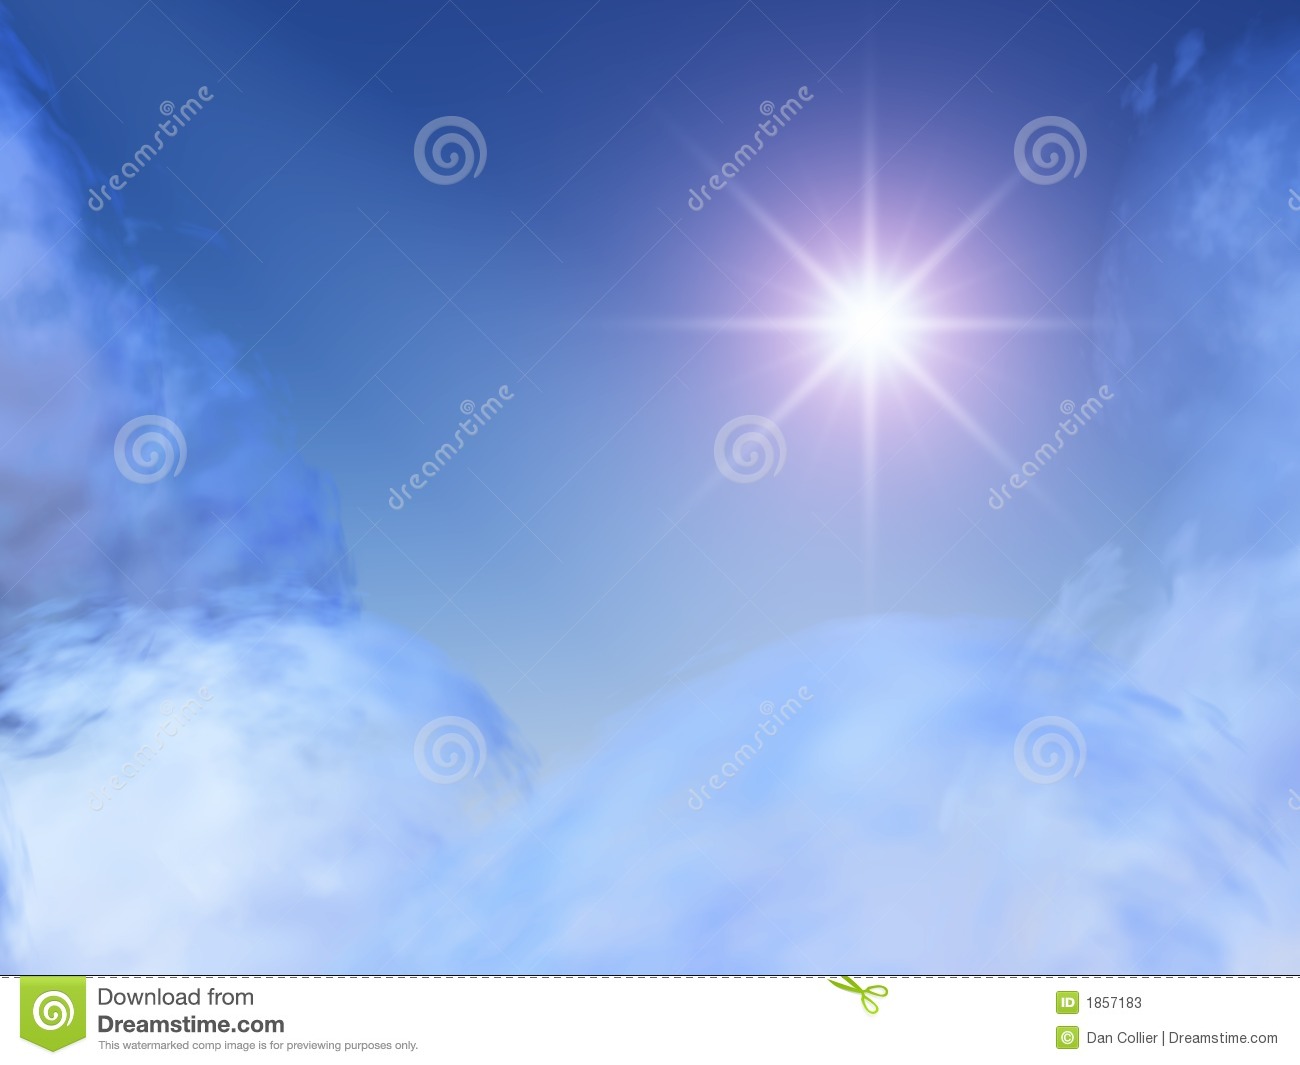 Illustrated Of A Bright Star In Heavenly Clouds